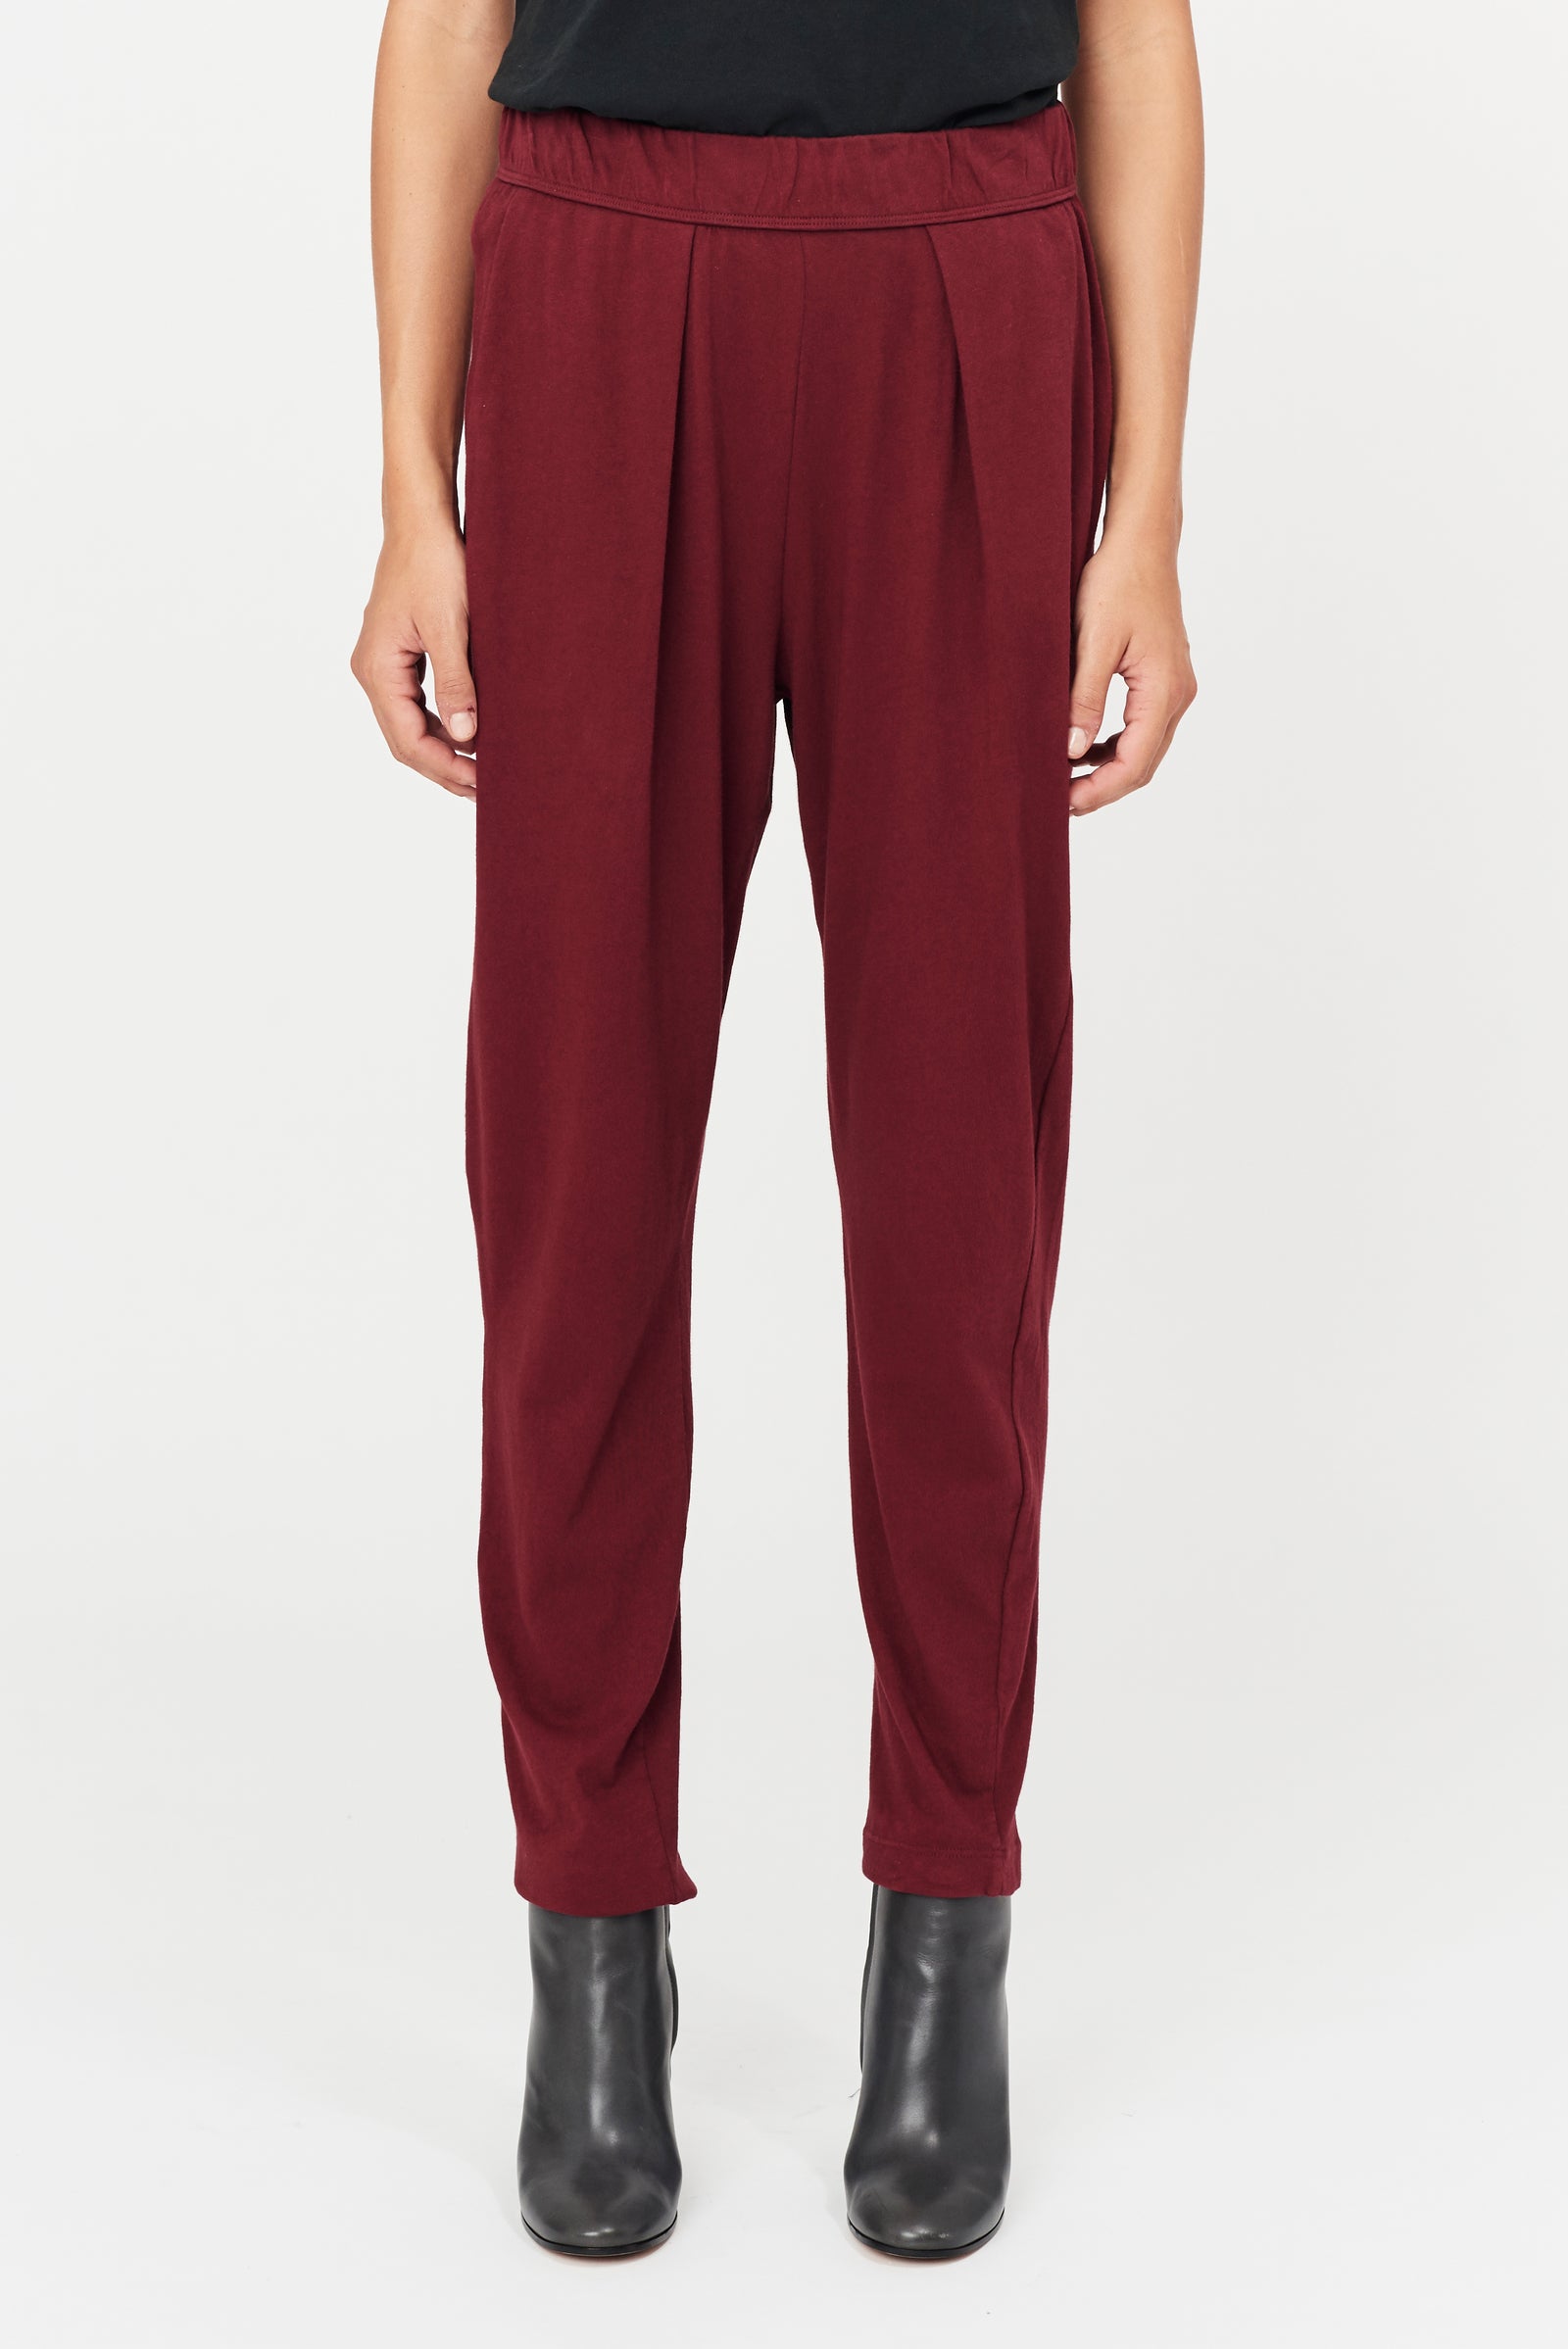 Sienna Classic Jersey Easy Pant Front Close-Up View